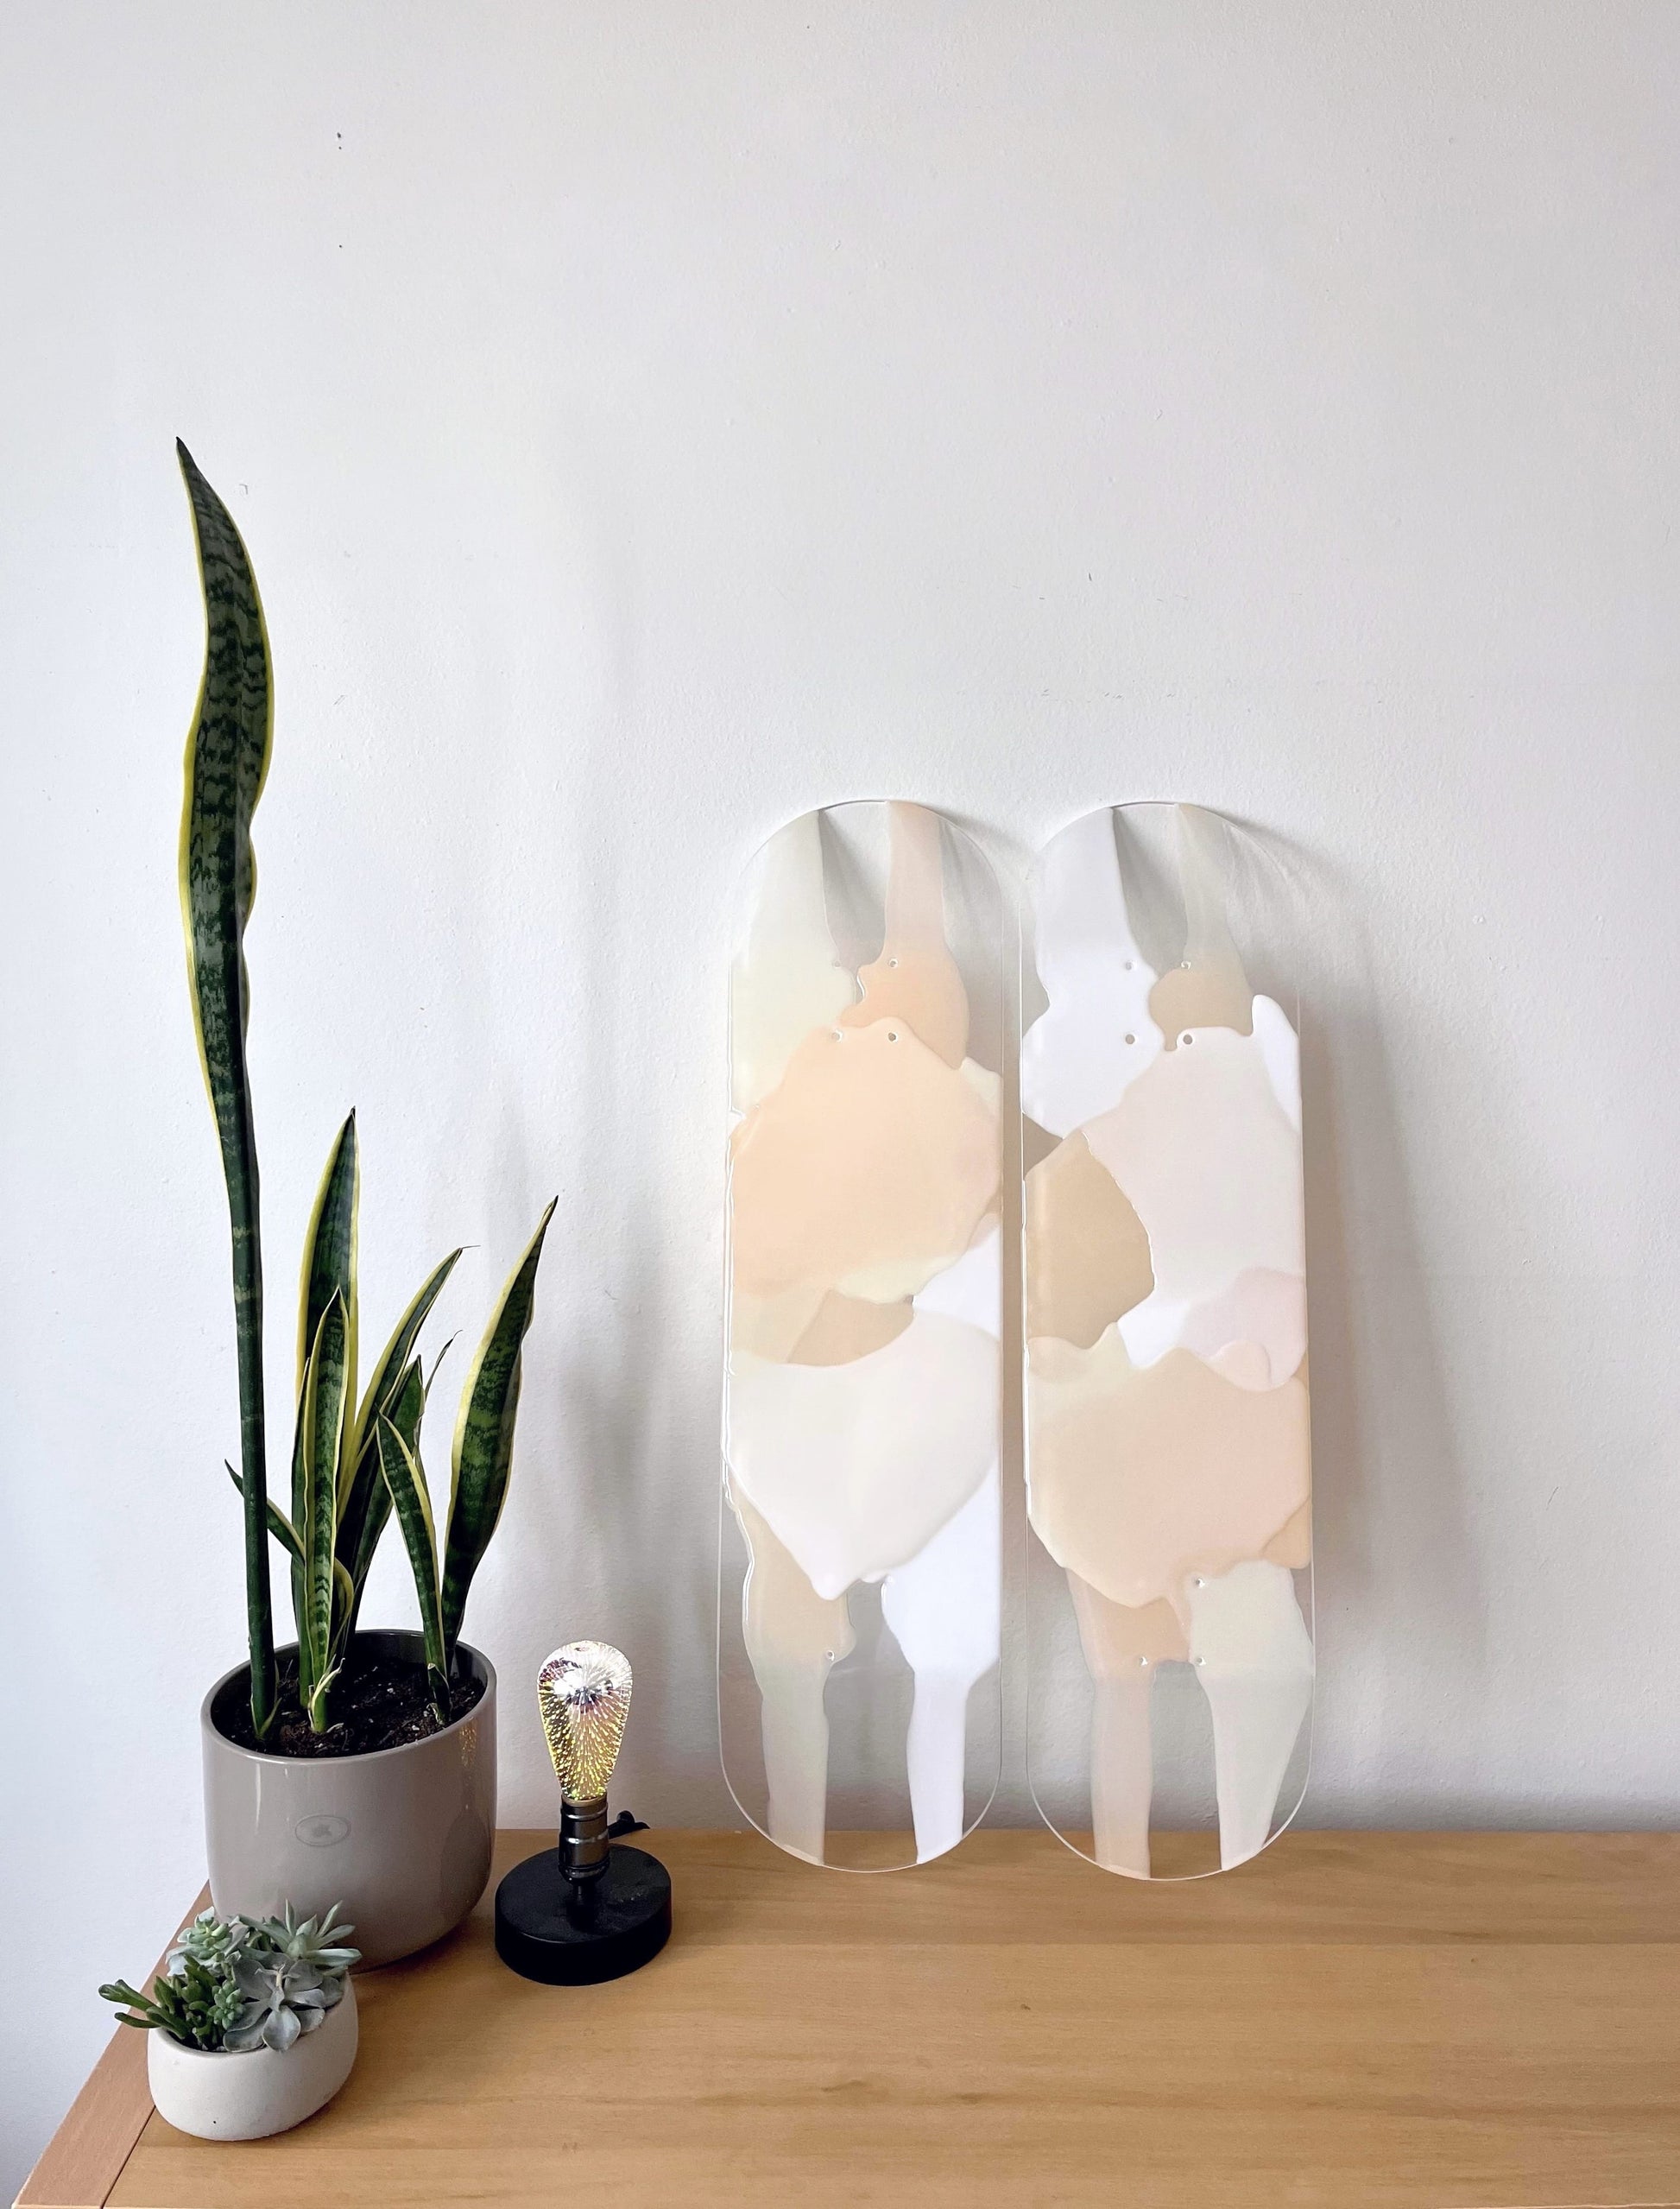 Two see-through, bohemian, neutral colored skateboard decks made of white, taupe, beige and cream resin layers leaning against wall.